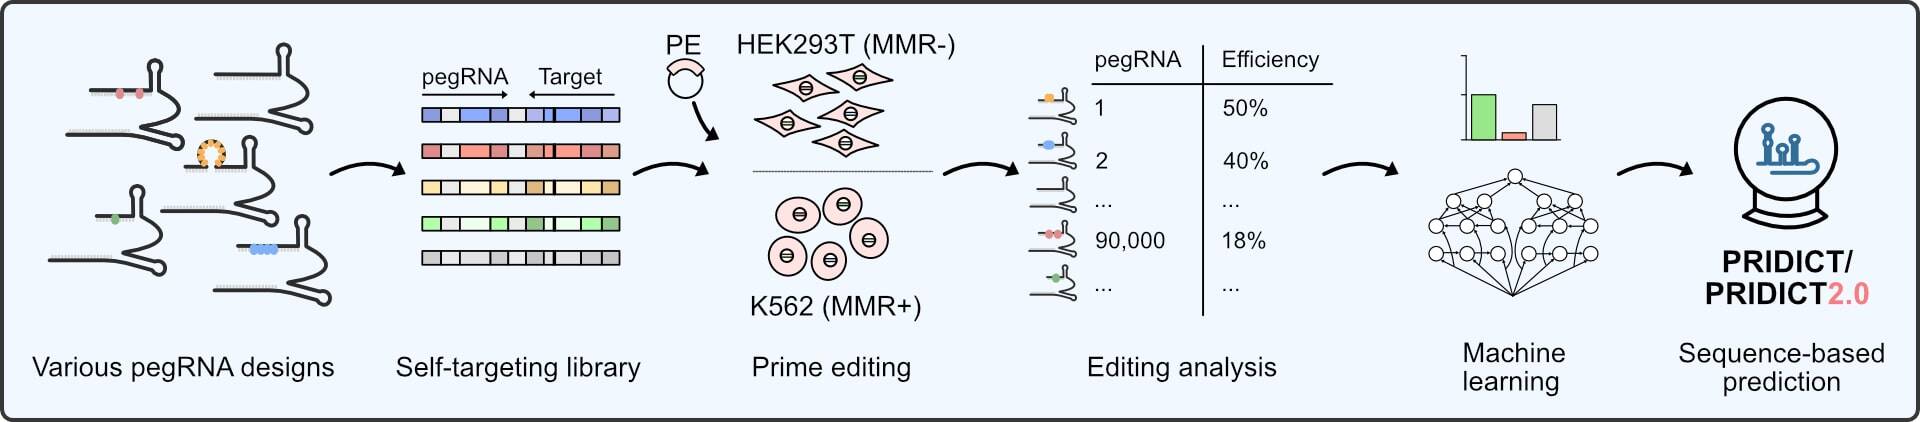 Graphic showing various pegRNA designs leading to a self-targeting library, then PE is added in to HEK293T cells (MMR-) and K562 (MMR+) cells labeled Prime editing, leading to editing analysis, leading to machine learning, and ending in PRIDICT/PRIDICT2.0, labelled as sequenced-based prediction.